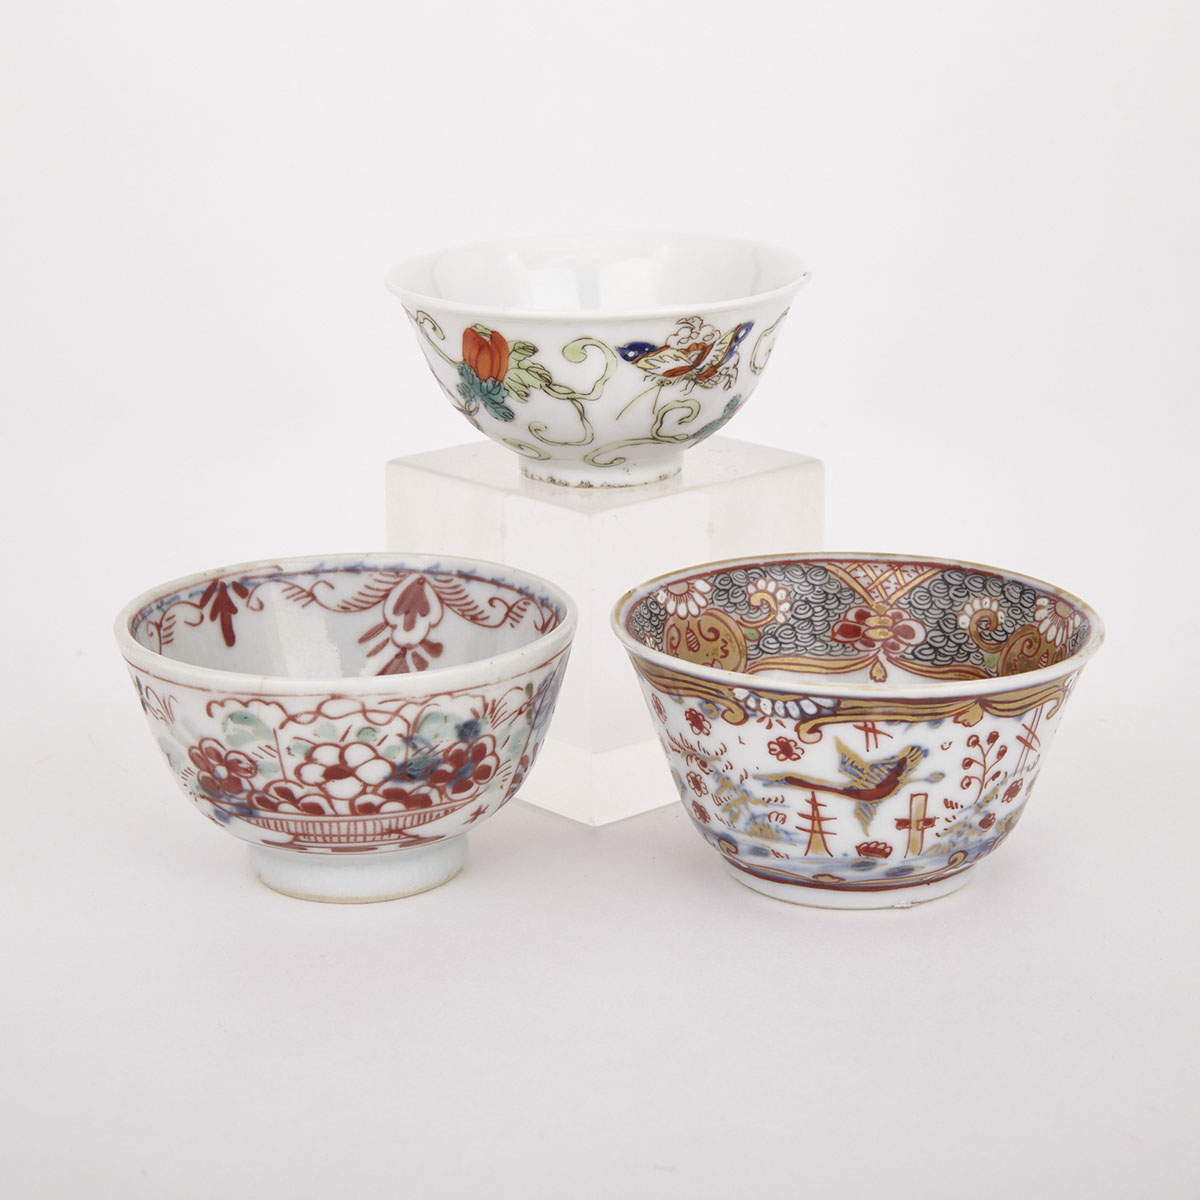 Three Famille Rose Cups, 19th Century